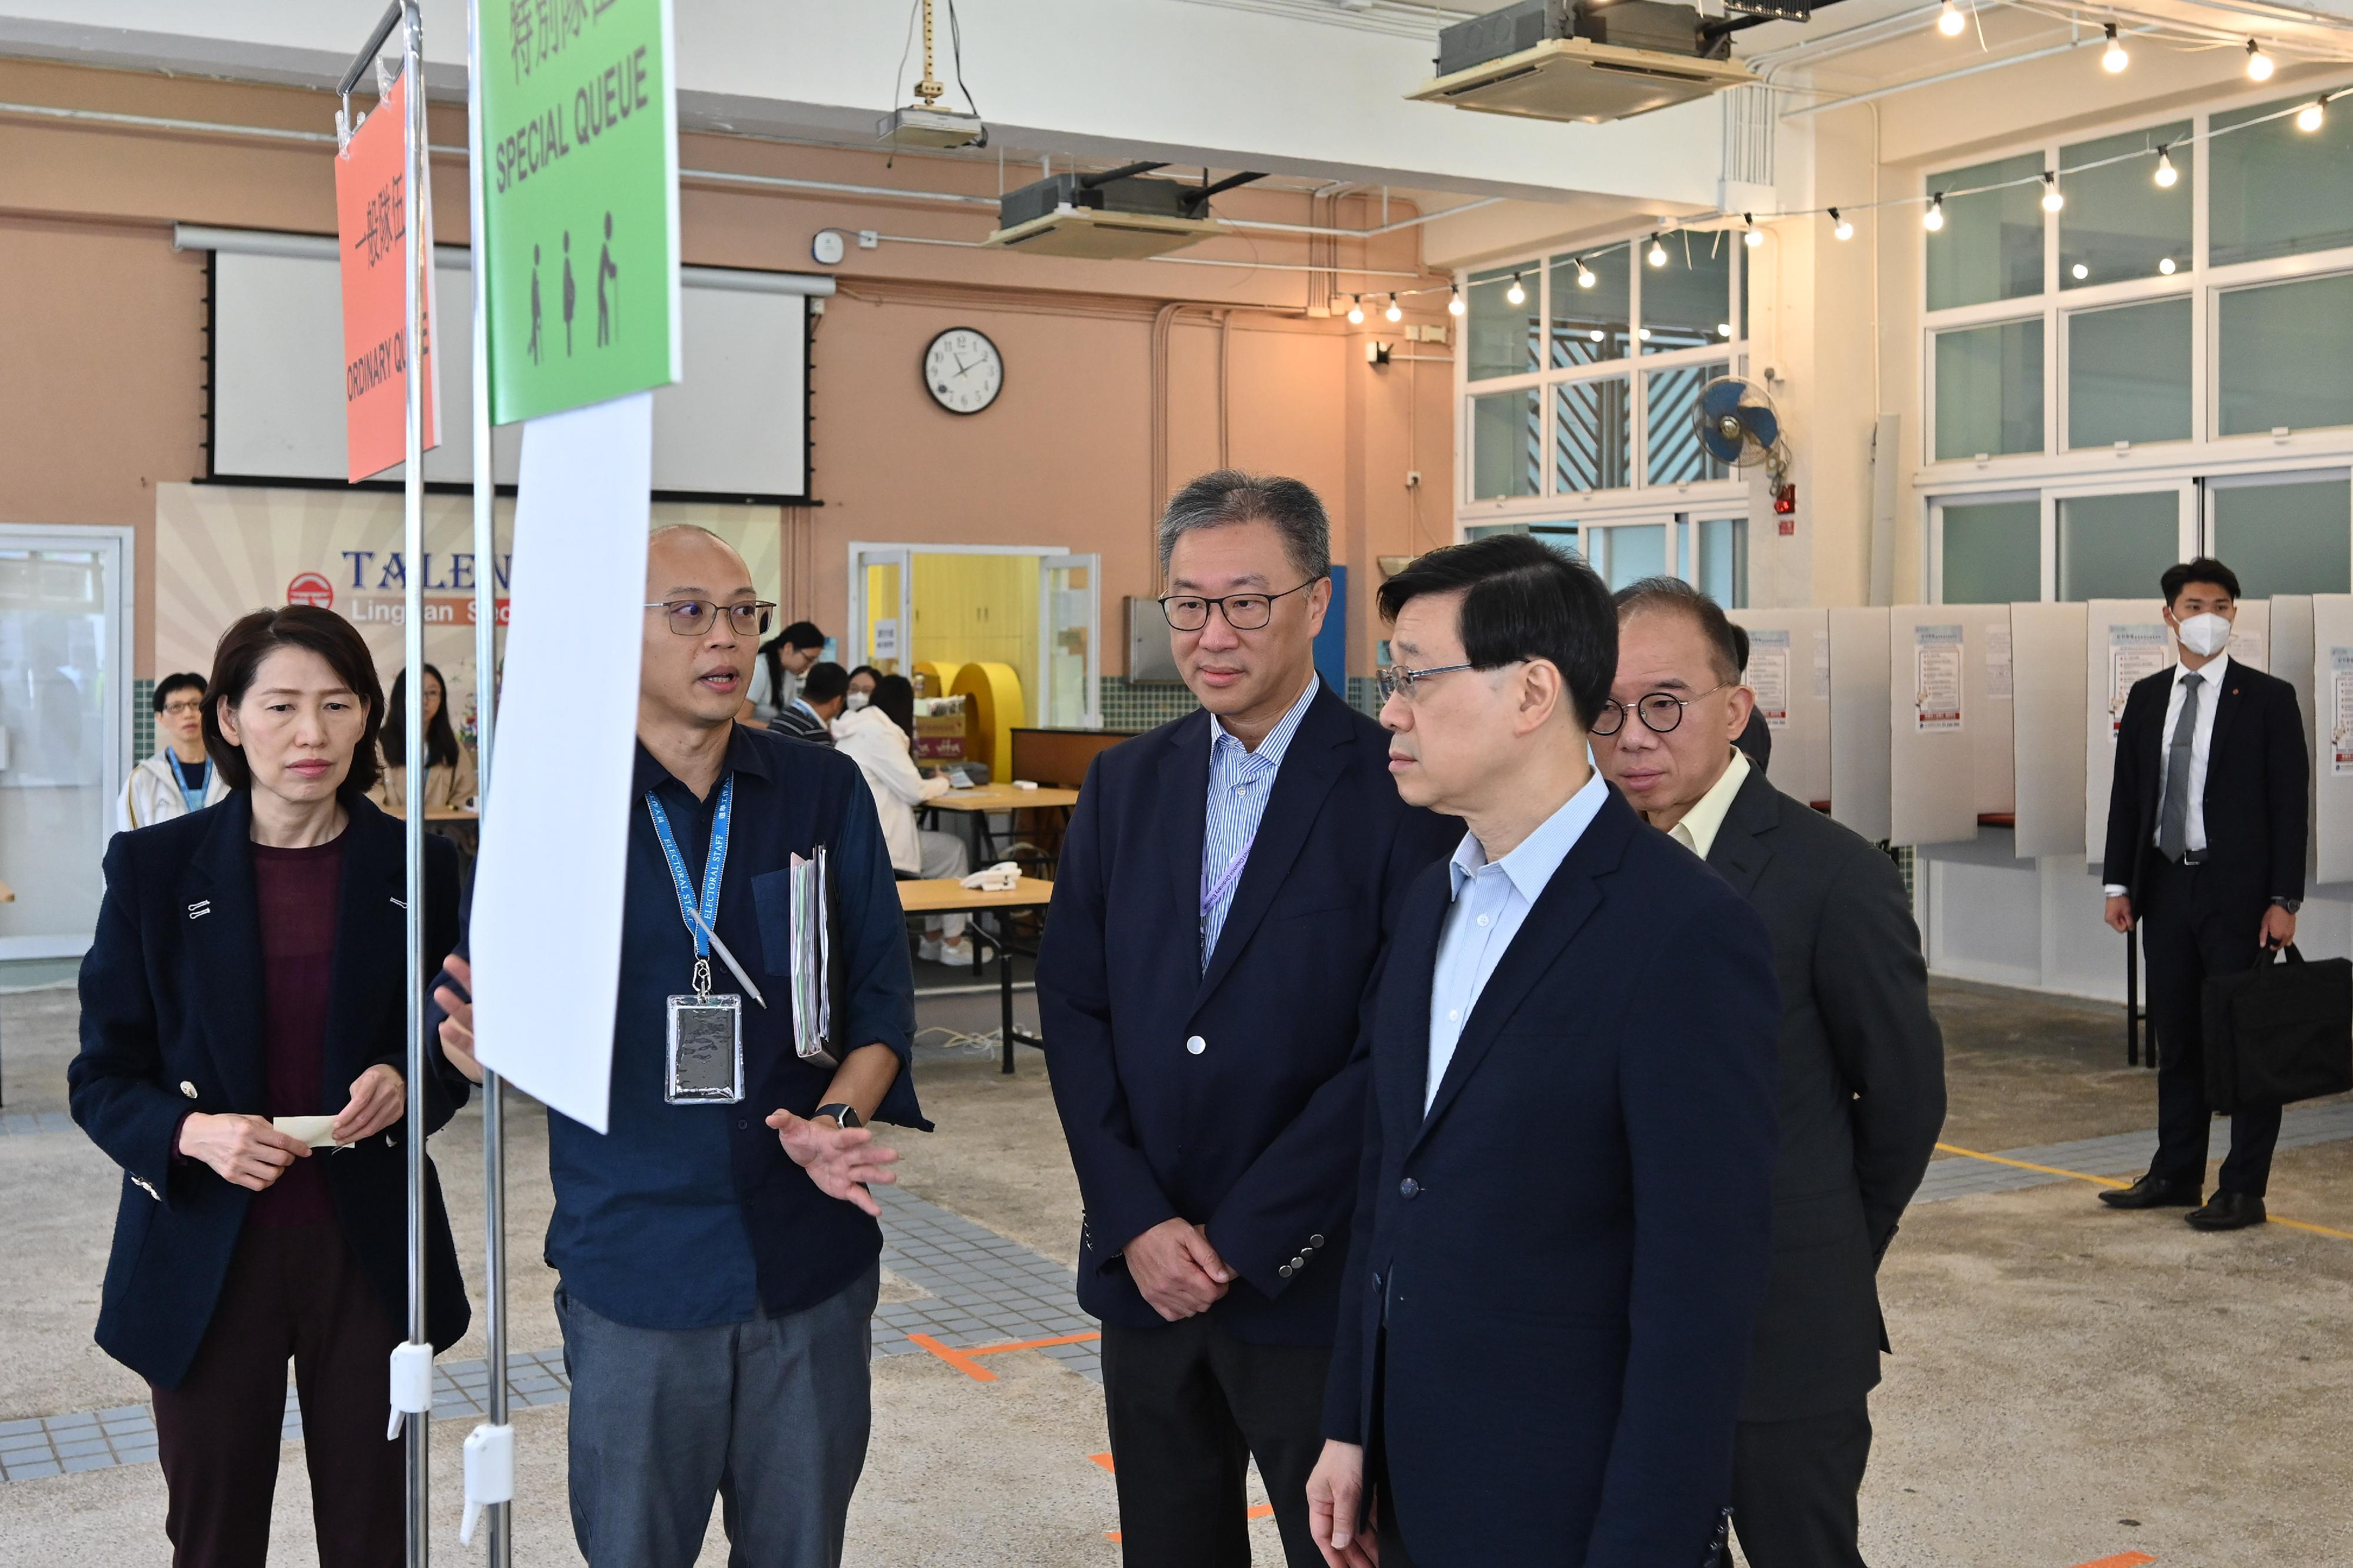 The Chairman of the Electoral Affairs Commission, Mr Justice David Lok (centre), and the Secretary for Constitutional and Mainland Affairs, Mr Erick Tsang Kwok-wai (first right), accompanied the Chief Executive, Mr John Lee (second right), to inspect the District Council geographical constituency polling station of the 2023 District Council Ordinary Election at Lingnan Secondary School this morning (December 9). Also present was the Director of the Chief Executive's Office, Ms Carol Yip (first left).